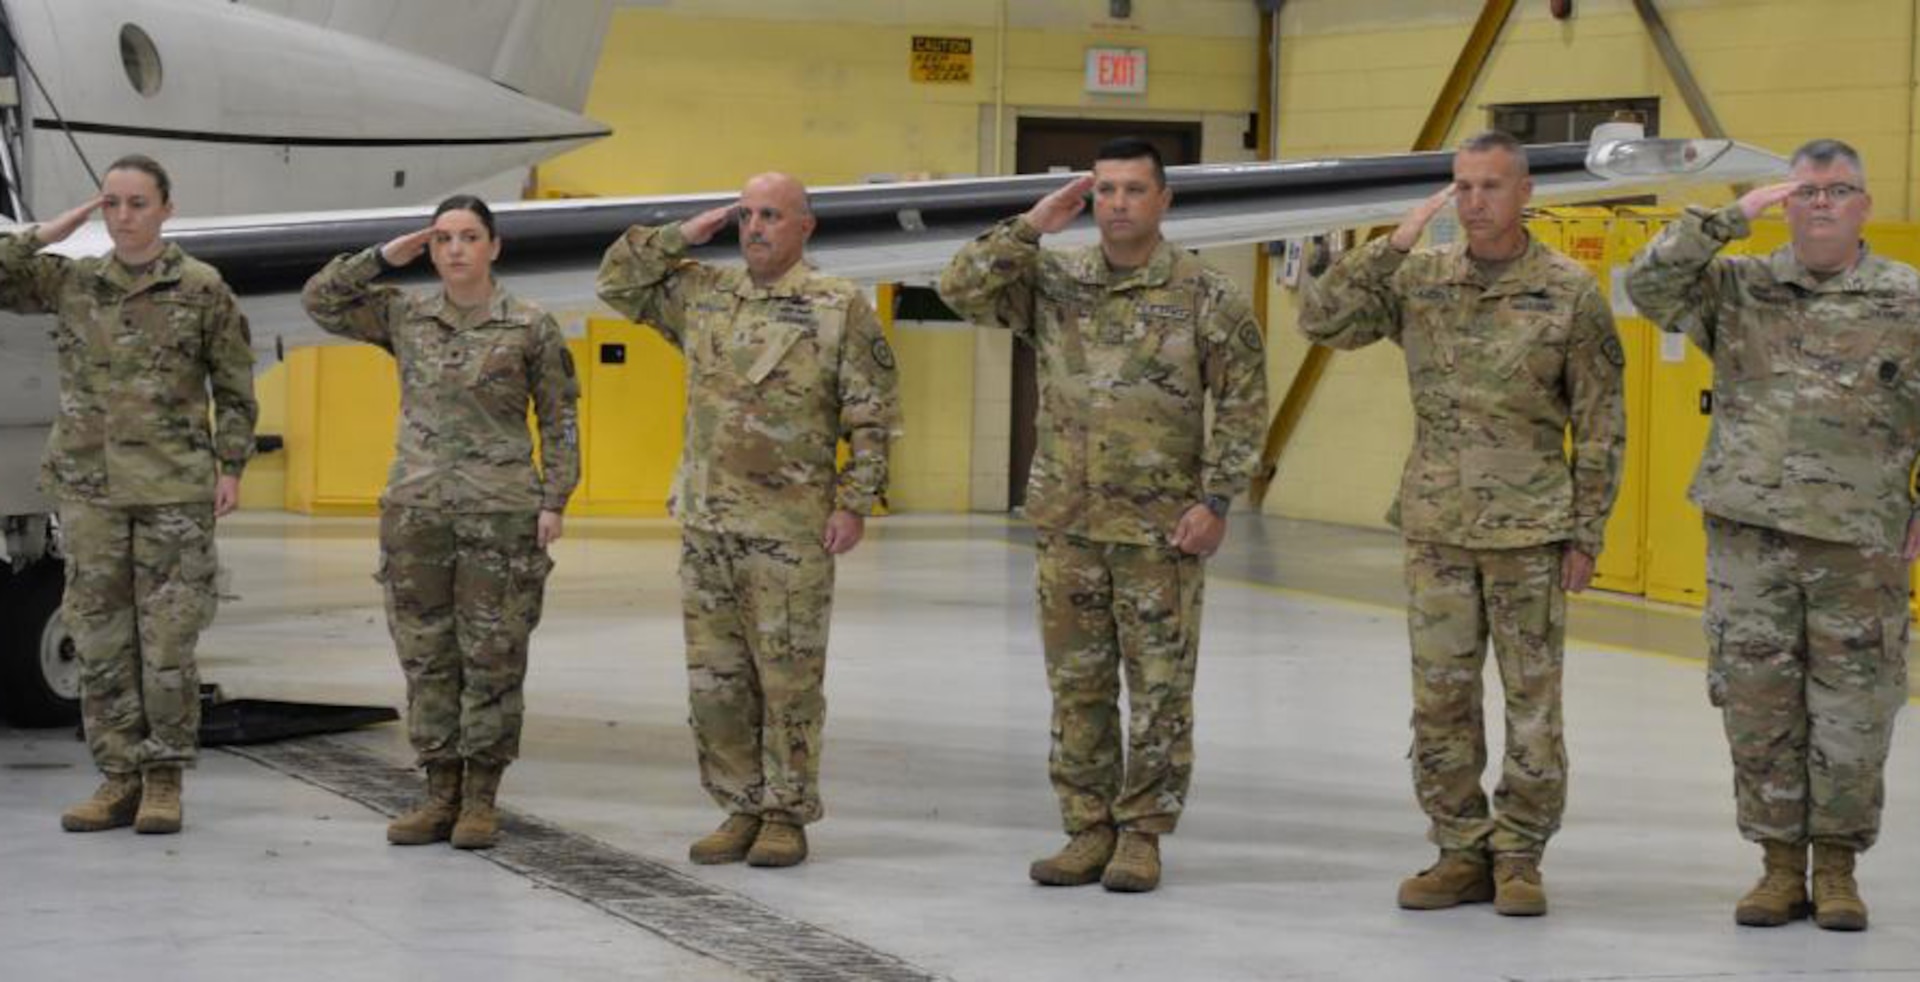 Six New York Army National Guard Soldiers assigned to Detachment 5 of Company C, 2nd Battalion, 245th Aviation Regiment, salute during the playing of the national anthem at a farewell ceremony at Army Aviation Support Facility #3 in Latham, New York, Nov. 6, 2022. The Soldiers, who fly the C-12 Huron transport aircraft, will deploy to Djibouti in East Africa to support U.S. military forces in the region.